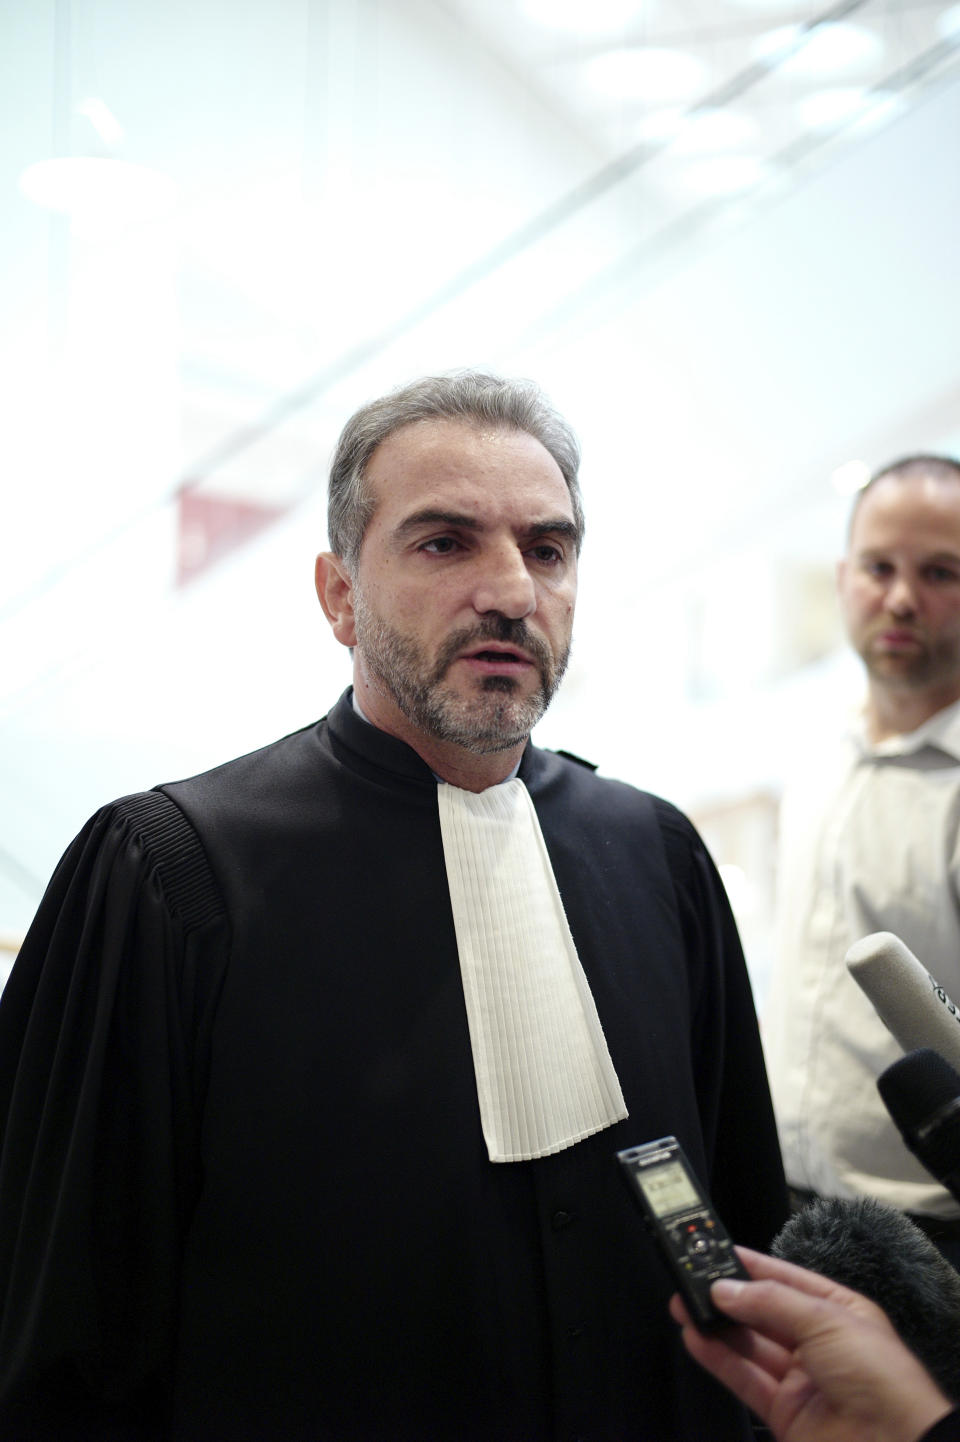 The plumber's lawyer Georges Karouni, speaks to the press at the courthouse, in Paris, Thursday, Sept. 12, 2019. The only daughter of Saudi Arabia's King Salman has been found guilty by a Paris court of charges that she ordered her bodyguard to detain and strike a plumber for taking photos at the Saudi royal family's apartment in the French capital. (AP Photo/Thibault Camus)